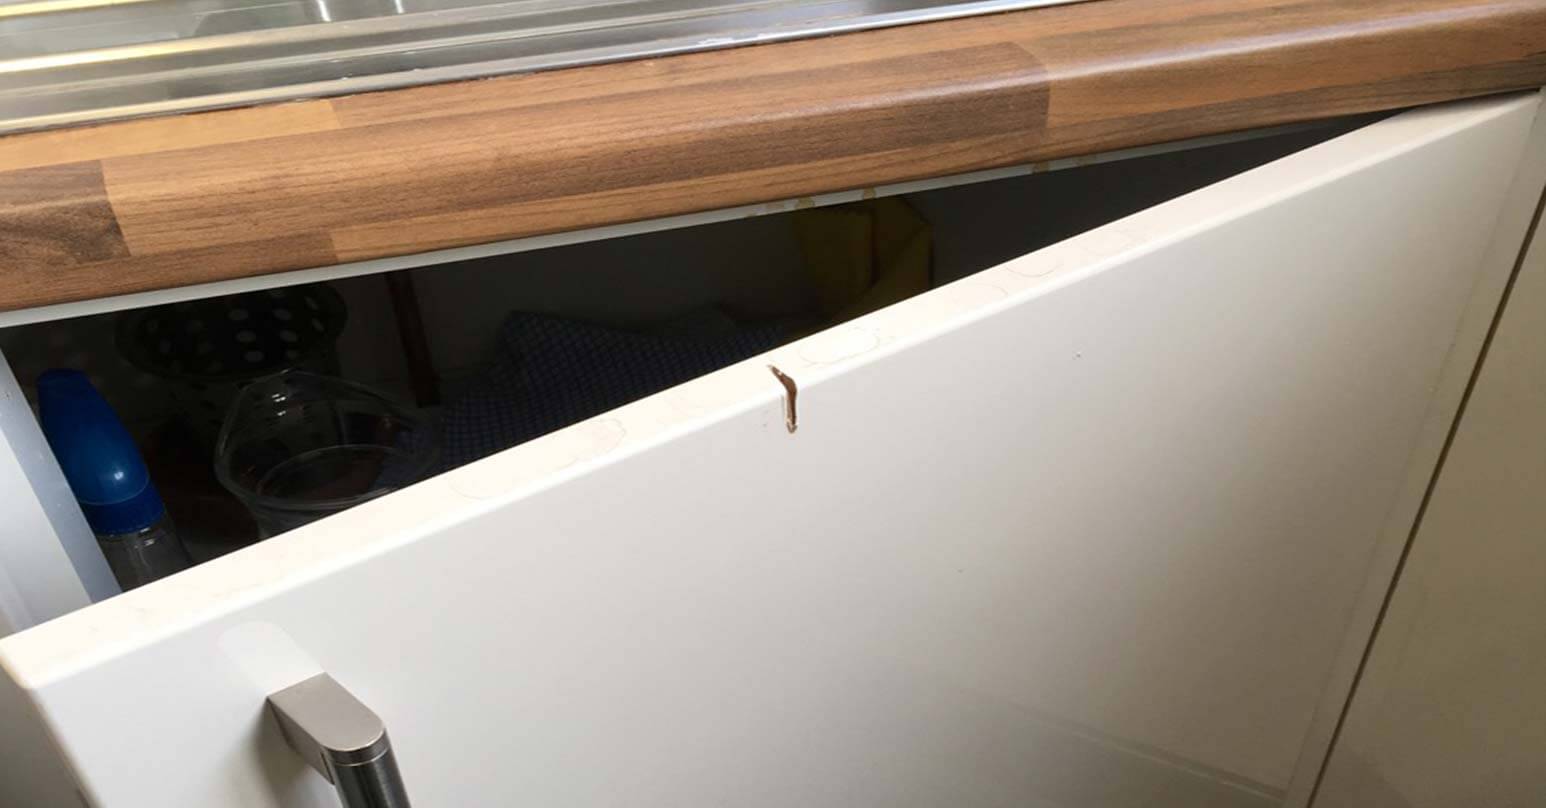 Kitchen Unit Repair Services Plastic, How To Remove Scratches From High Gloss Kitchen Units